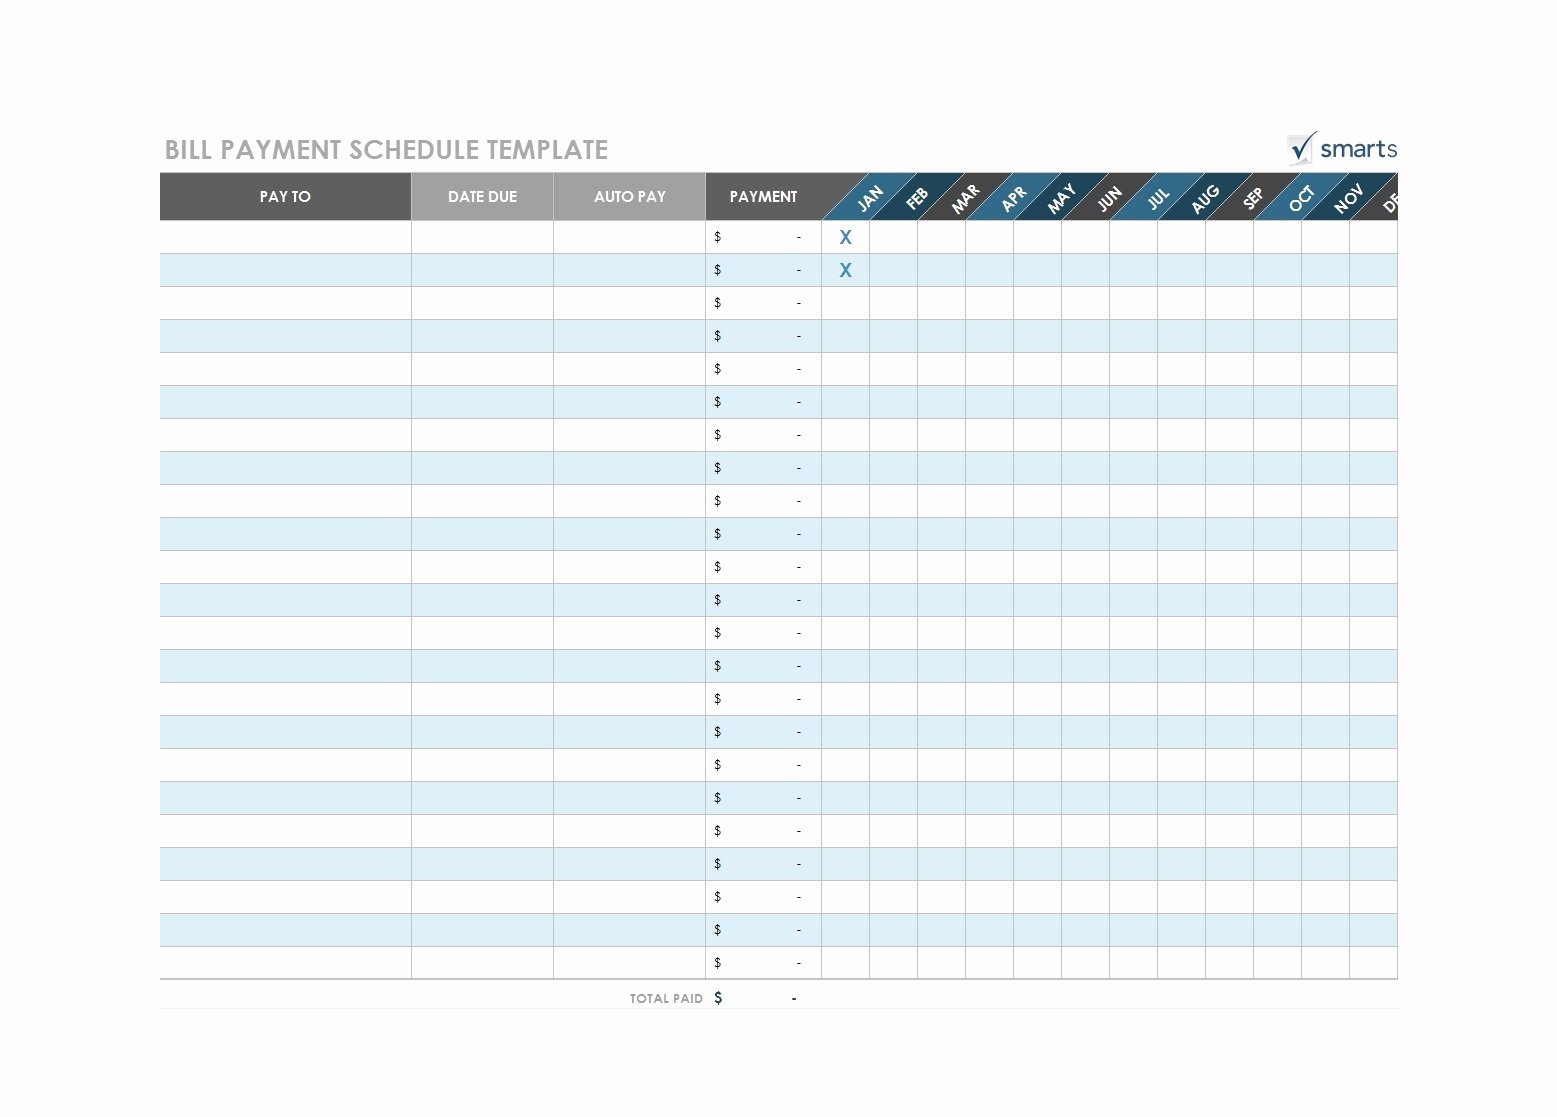 Bill Payment Schedule Template Excel Lovely Free Printable Bill Payment Template Calendar